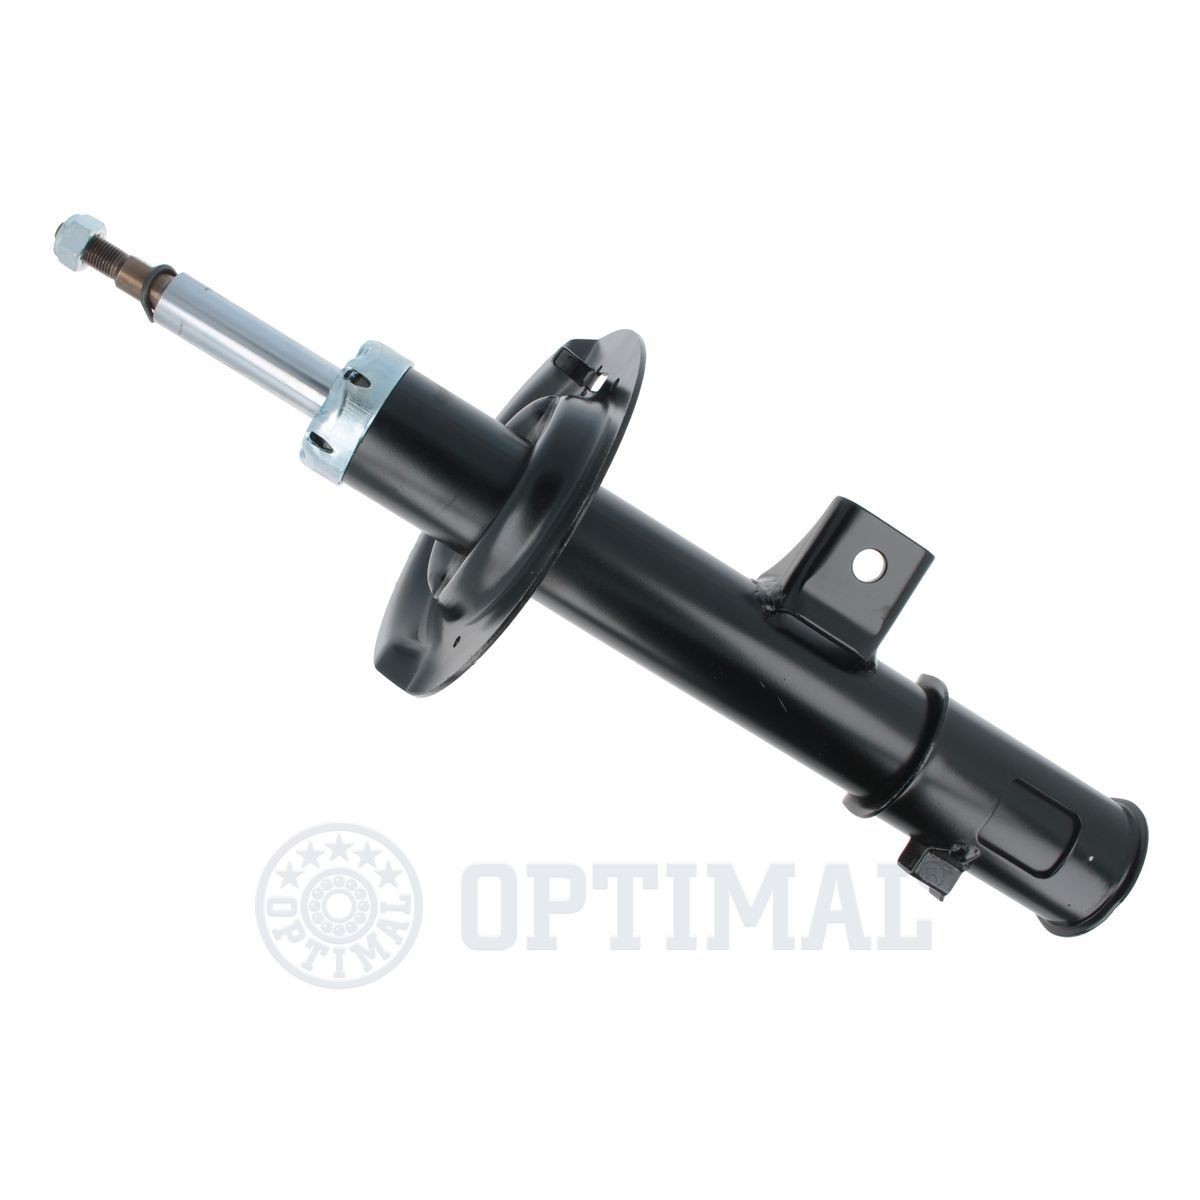 OPTIMAL A-67333G Shock absorber Right, Left, Front Axle, Gas Pressure, Suspension Strut Insert, Top pin